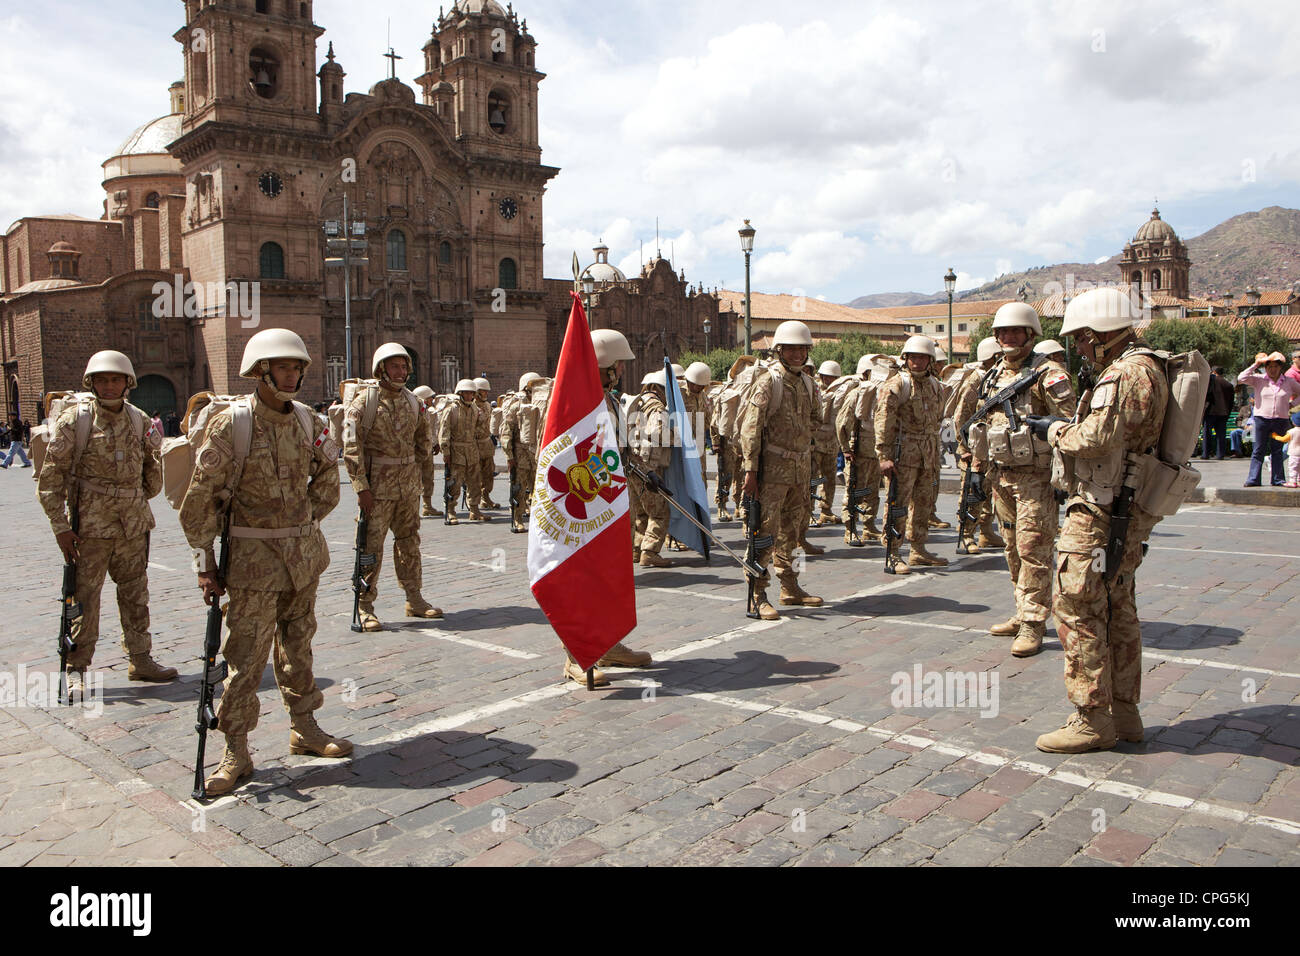 A military parade on the streets of Cusco, Peru Stock Photo